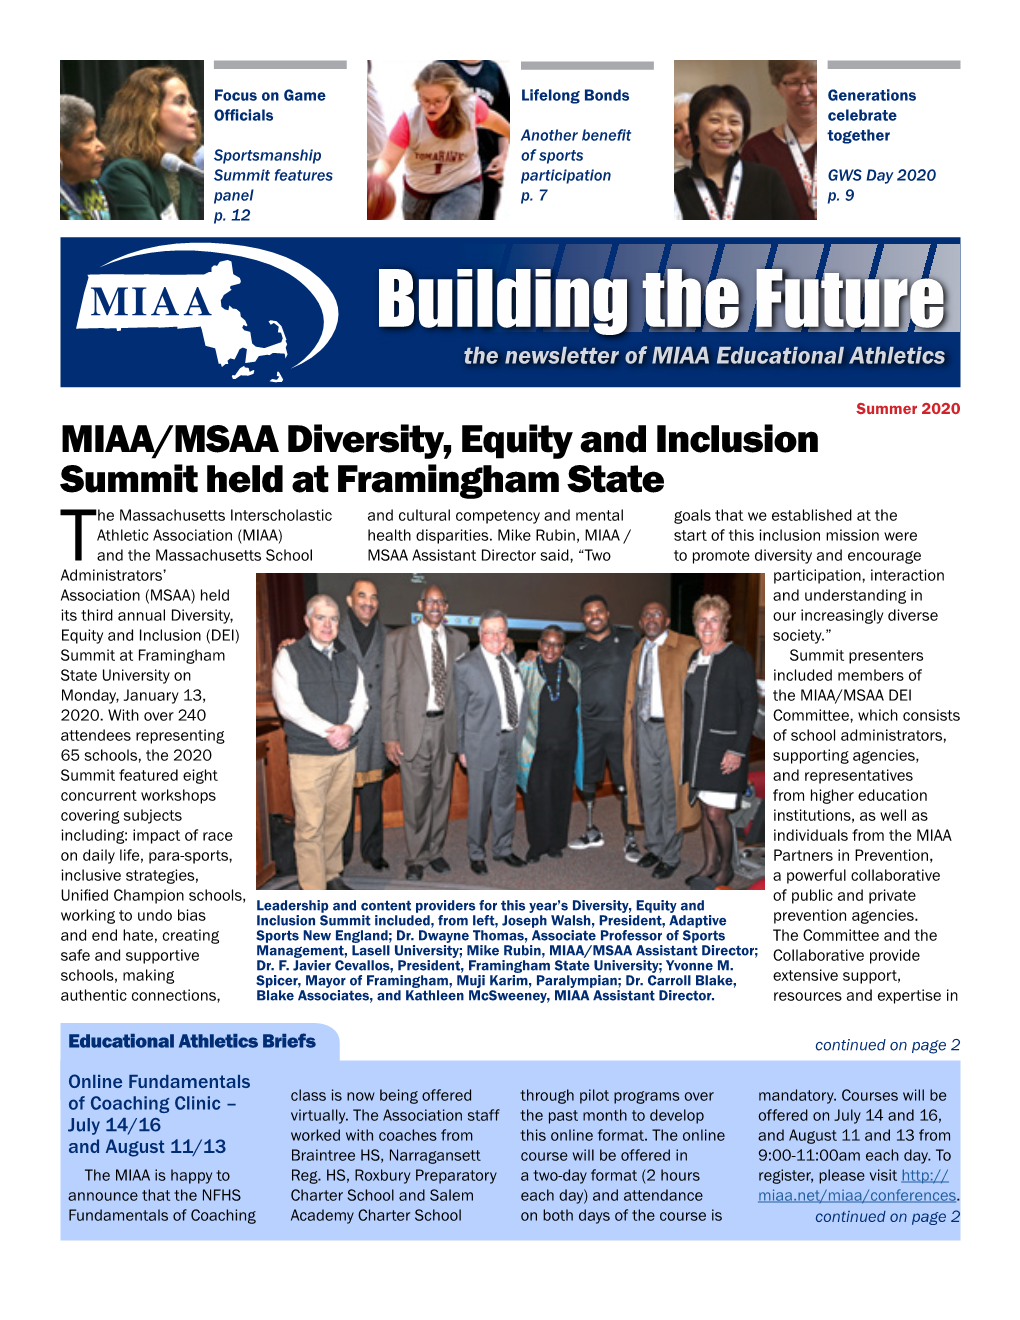 Building the Future the Newsletter of MIAA Educational Athletics